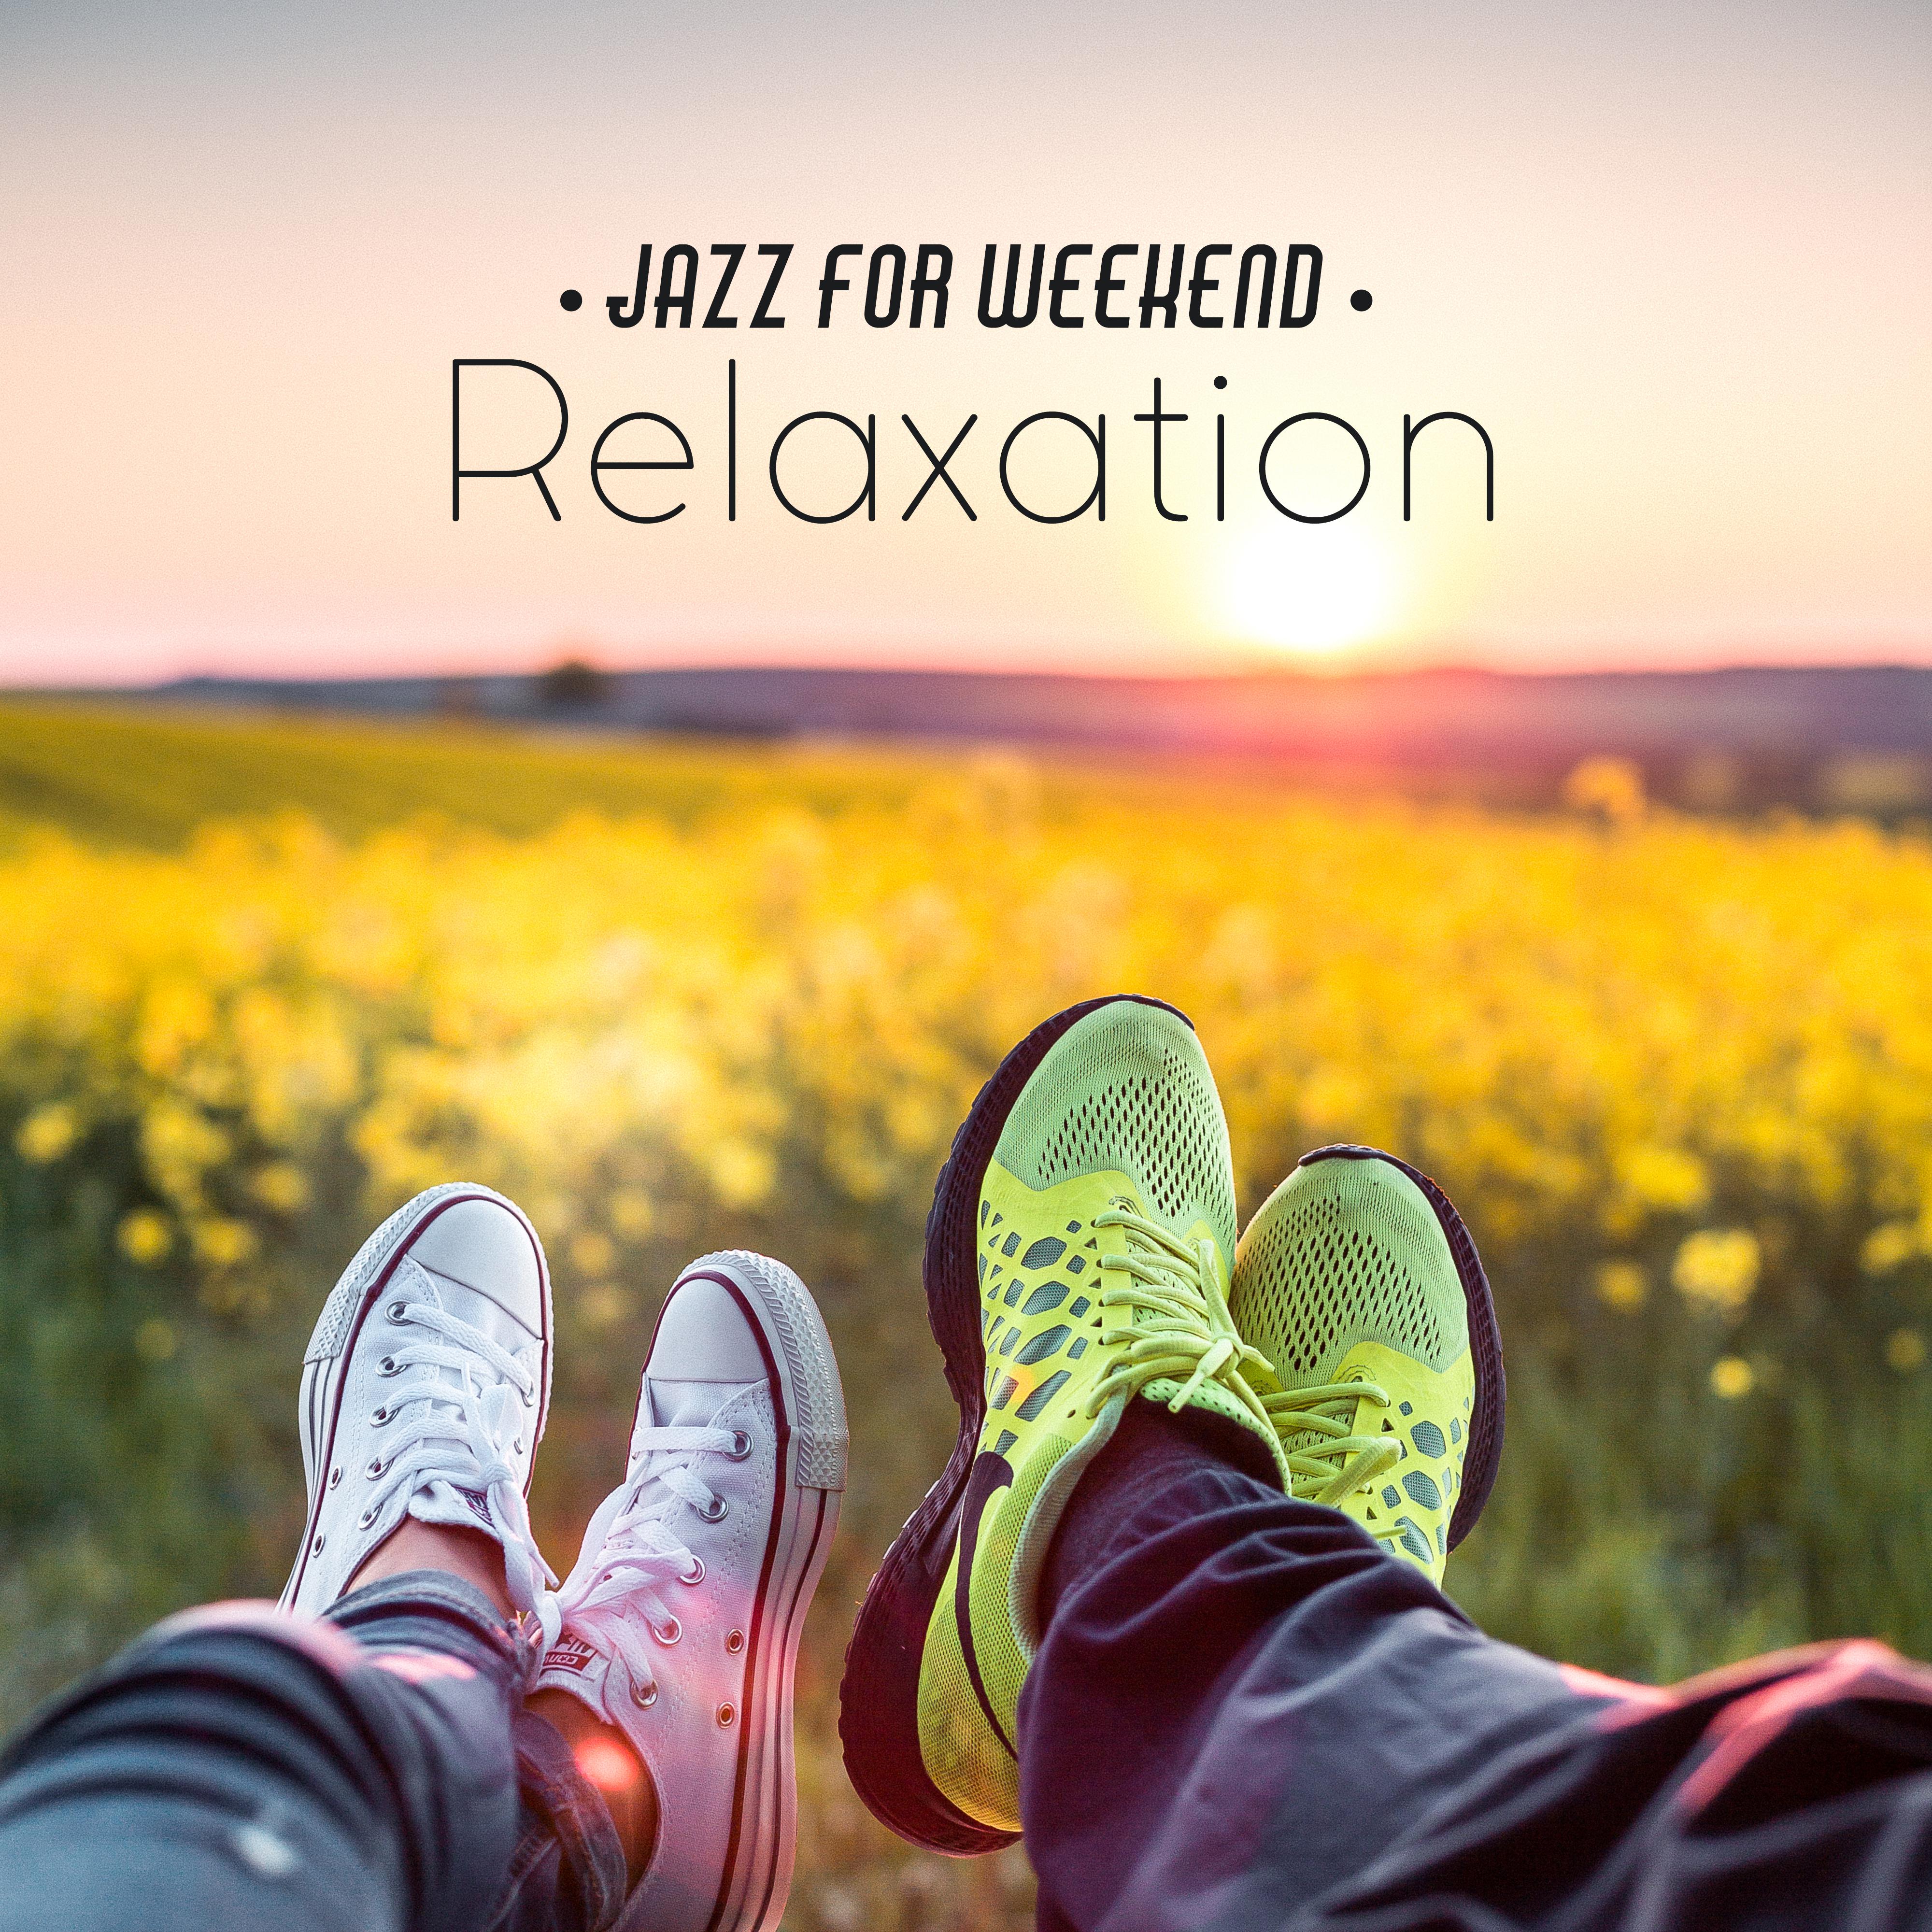 Jazz for Weekend Relaxation